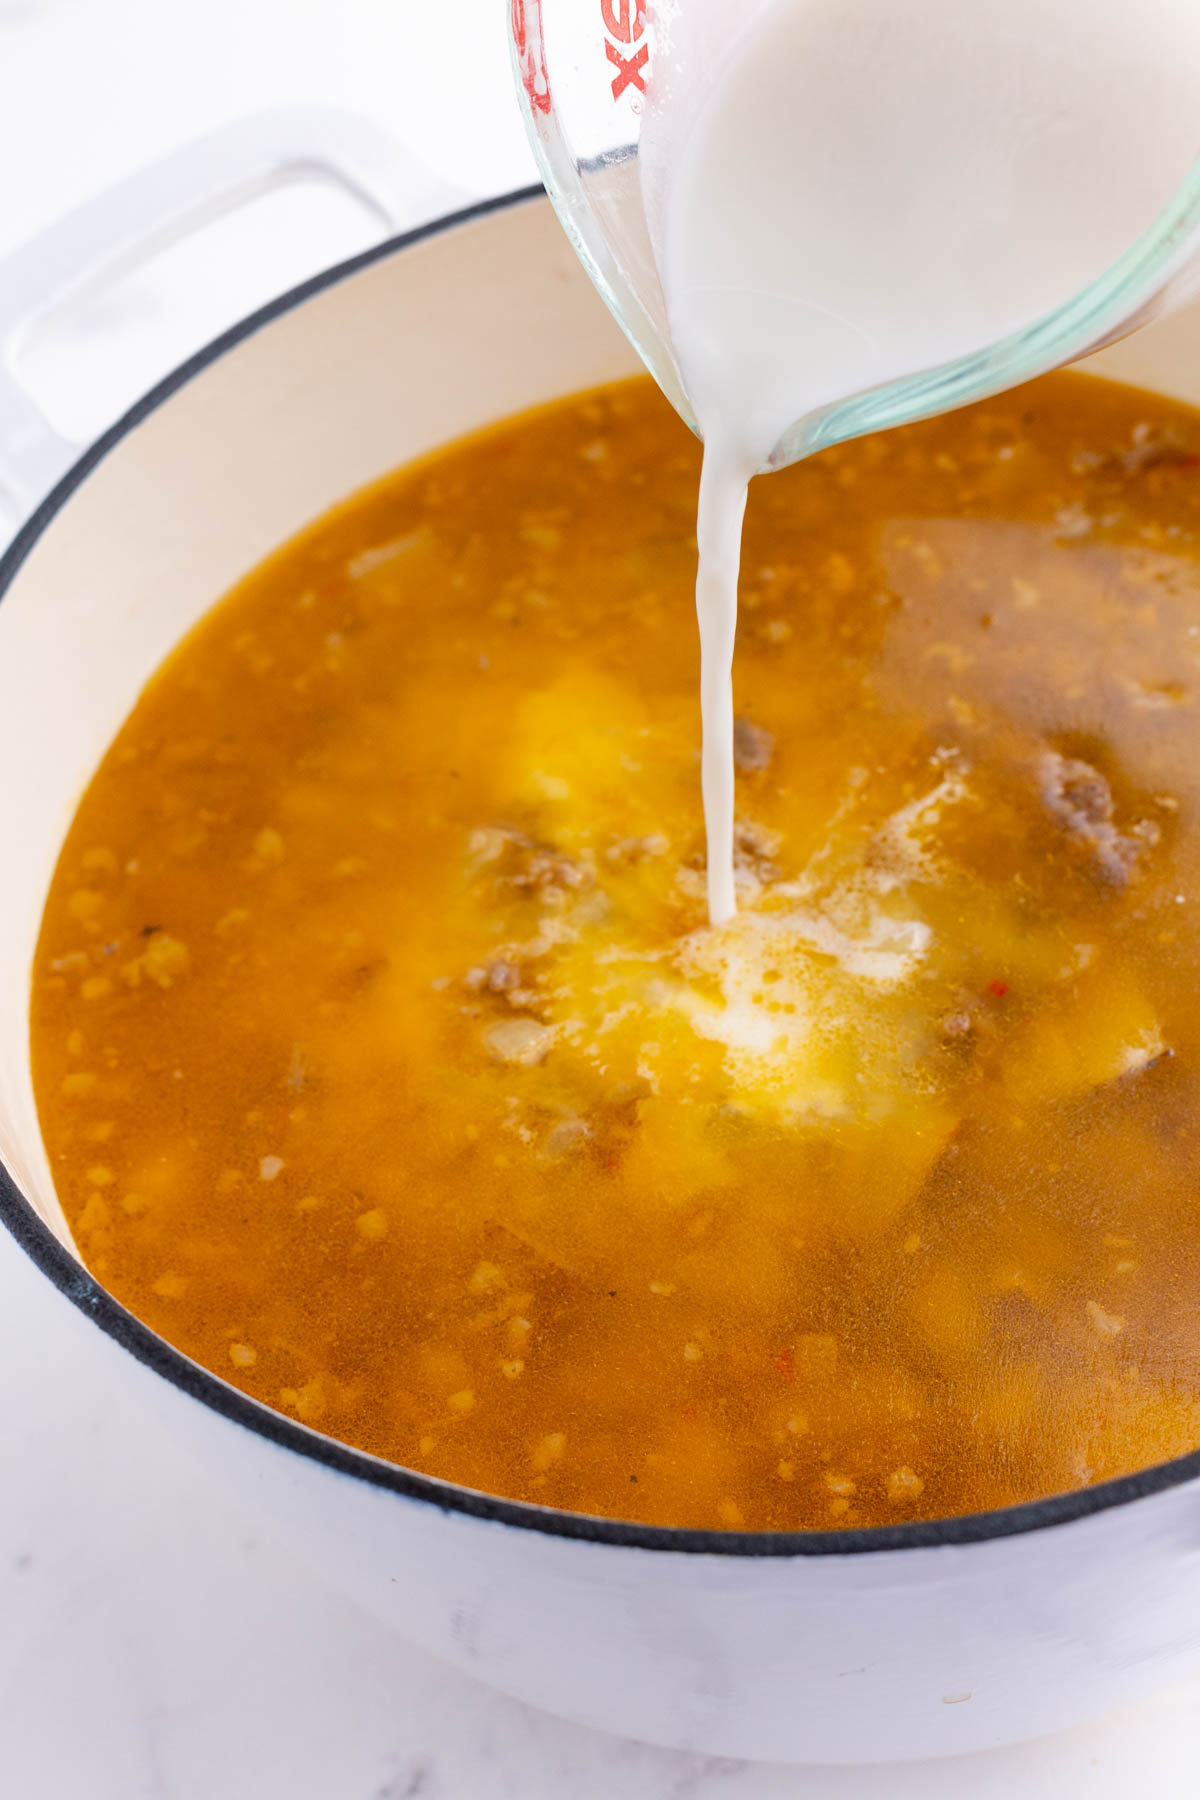 A starch slurry is added to the soup.